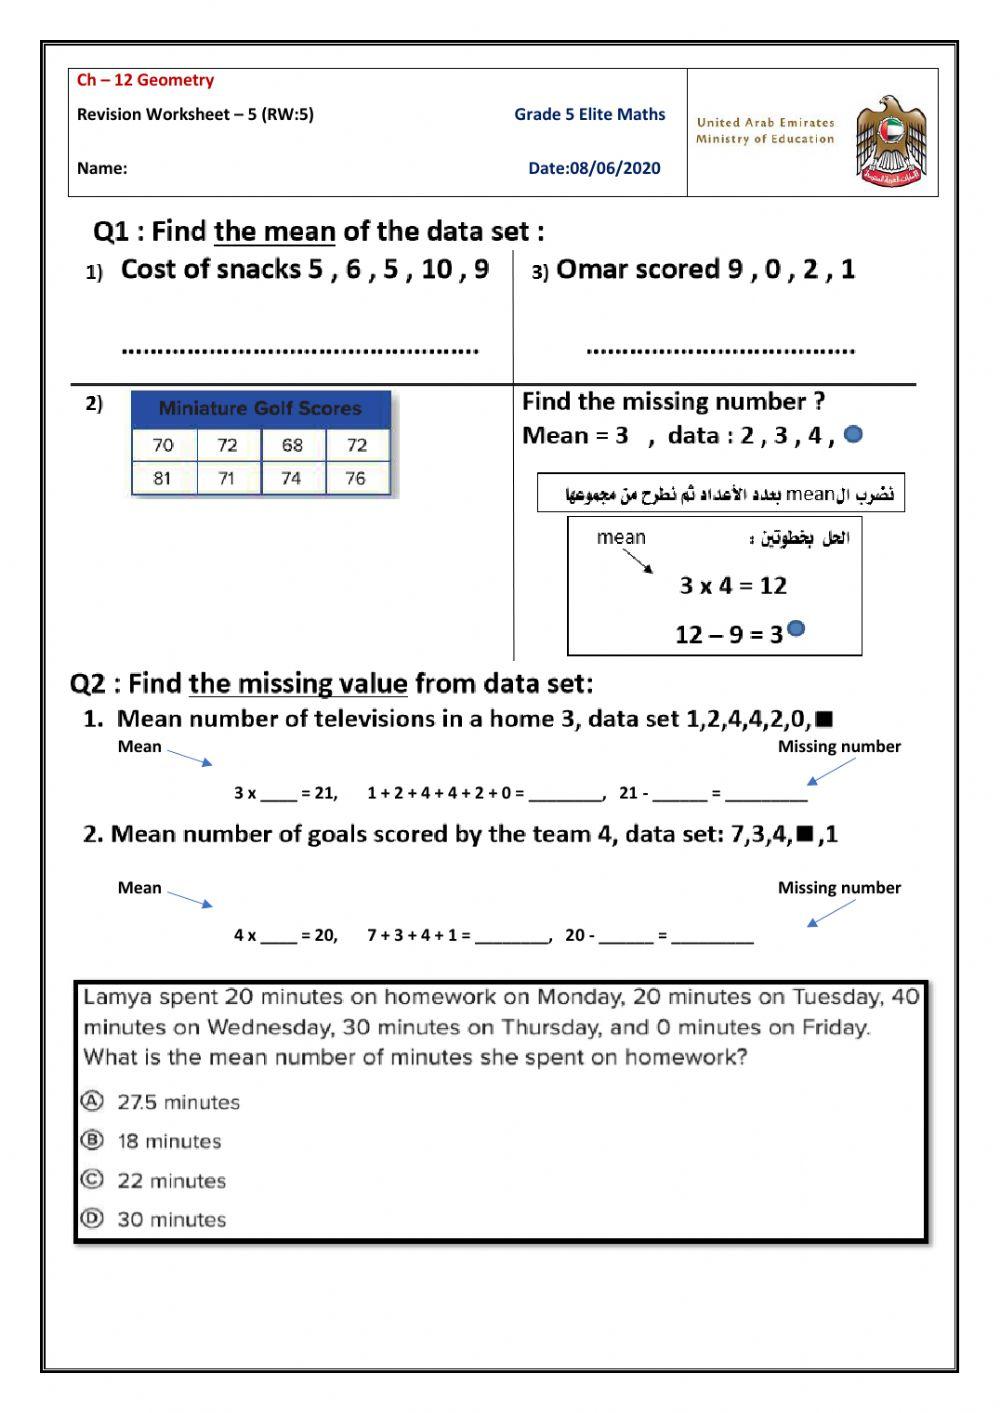 Revision Worksheet on Ch-11